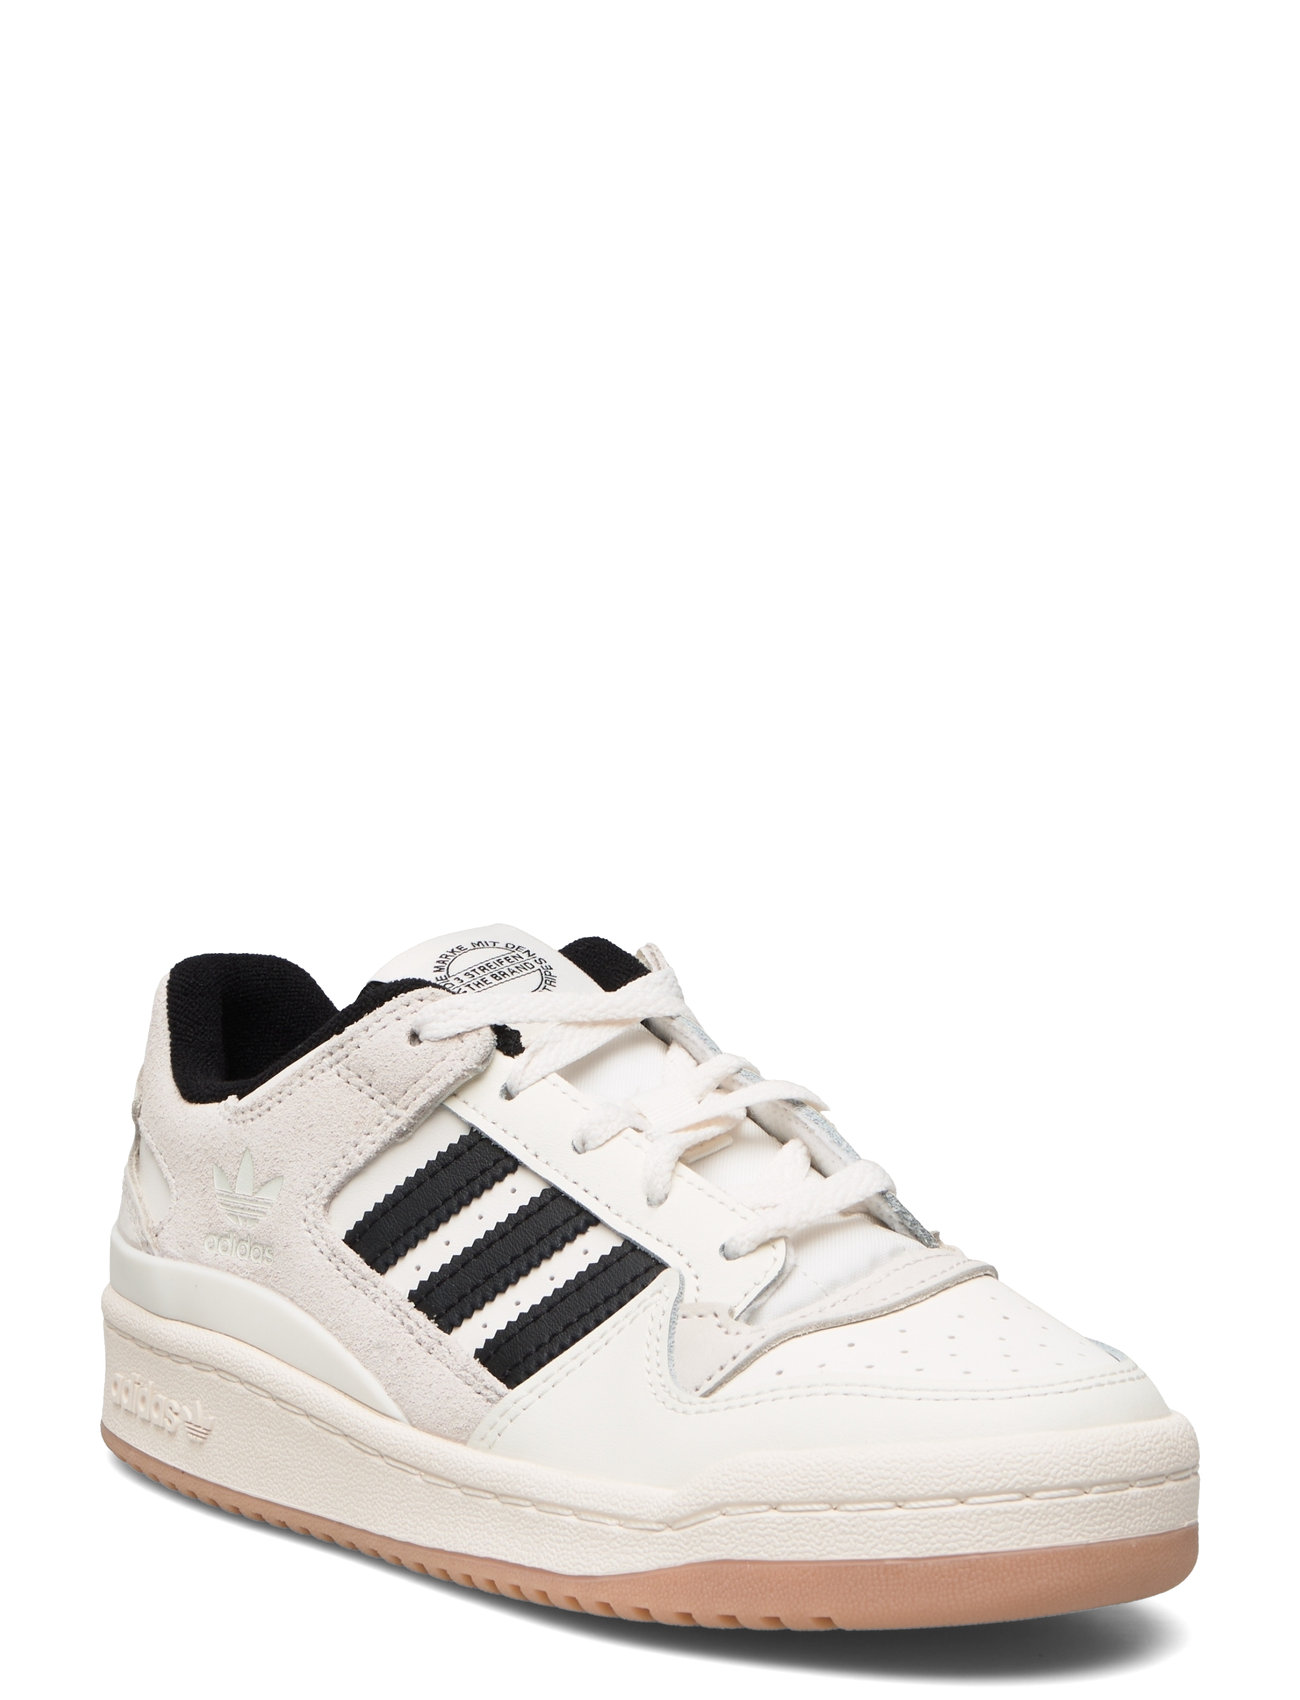 "adidas Originals" "Forum Low Cl W Sport Sneakers Low-top White Adidas